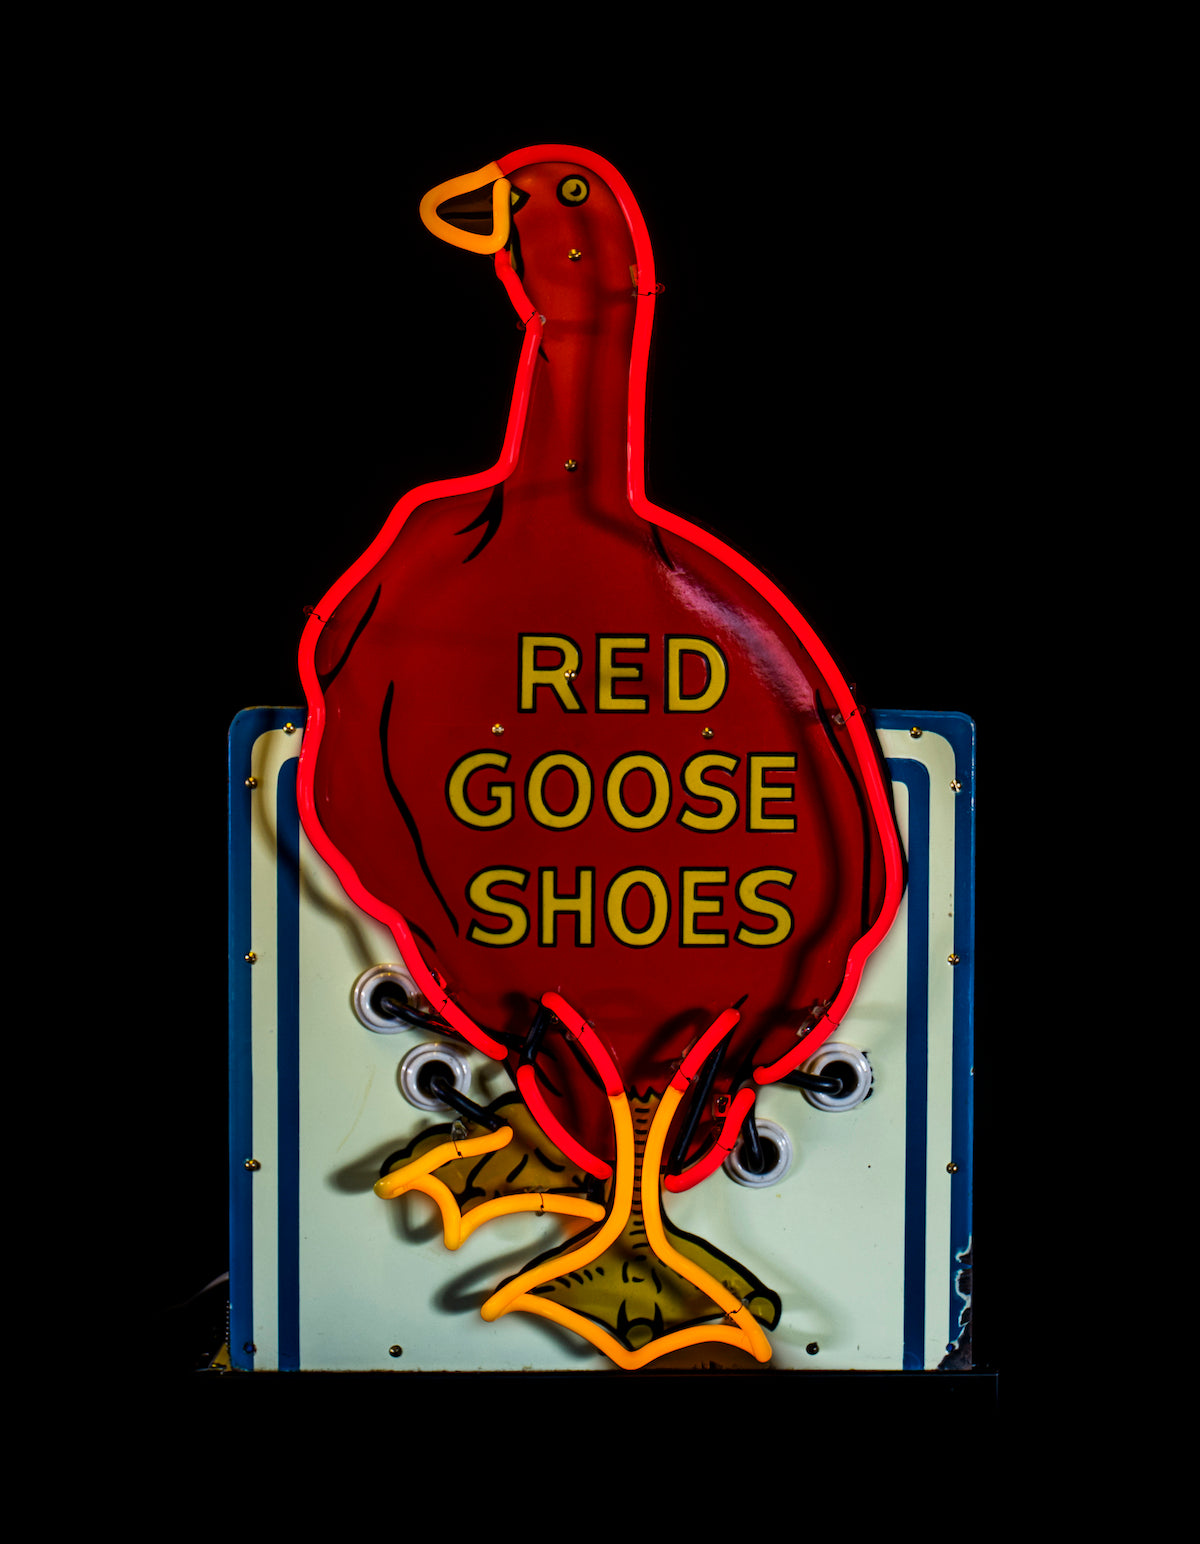 1940s〜RED GOOSE SHOES Advertising Sign - fishkabob.com